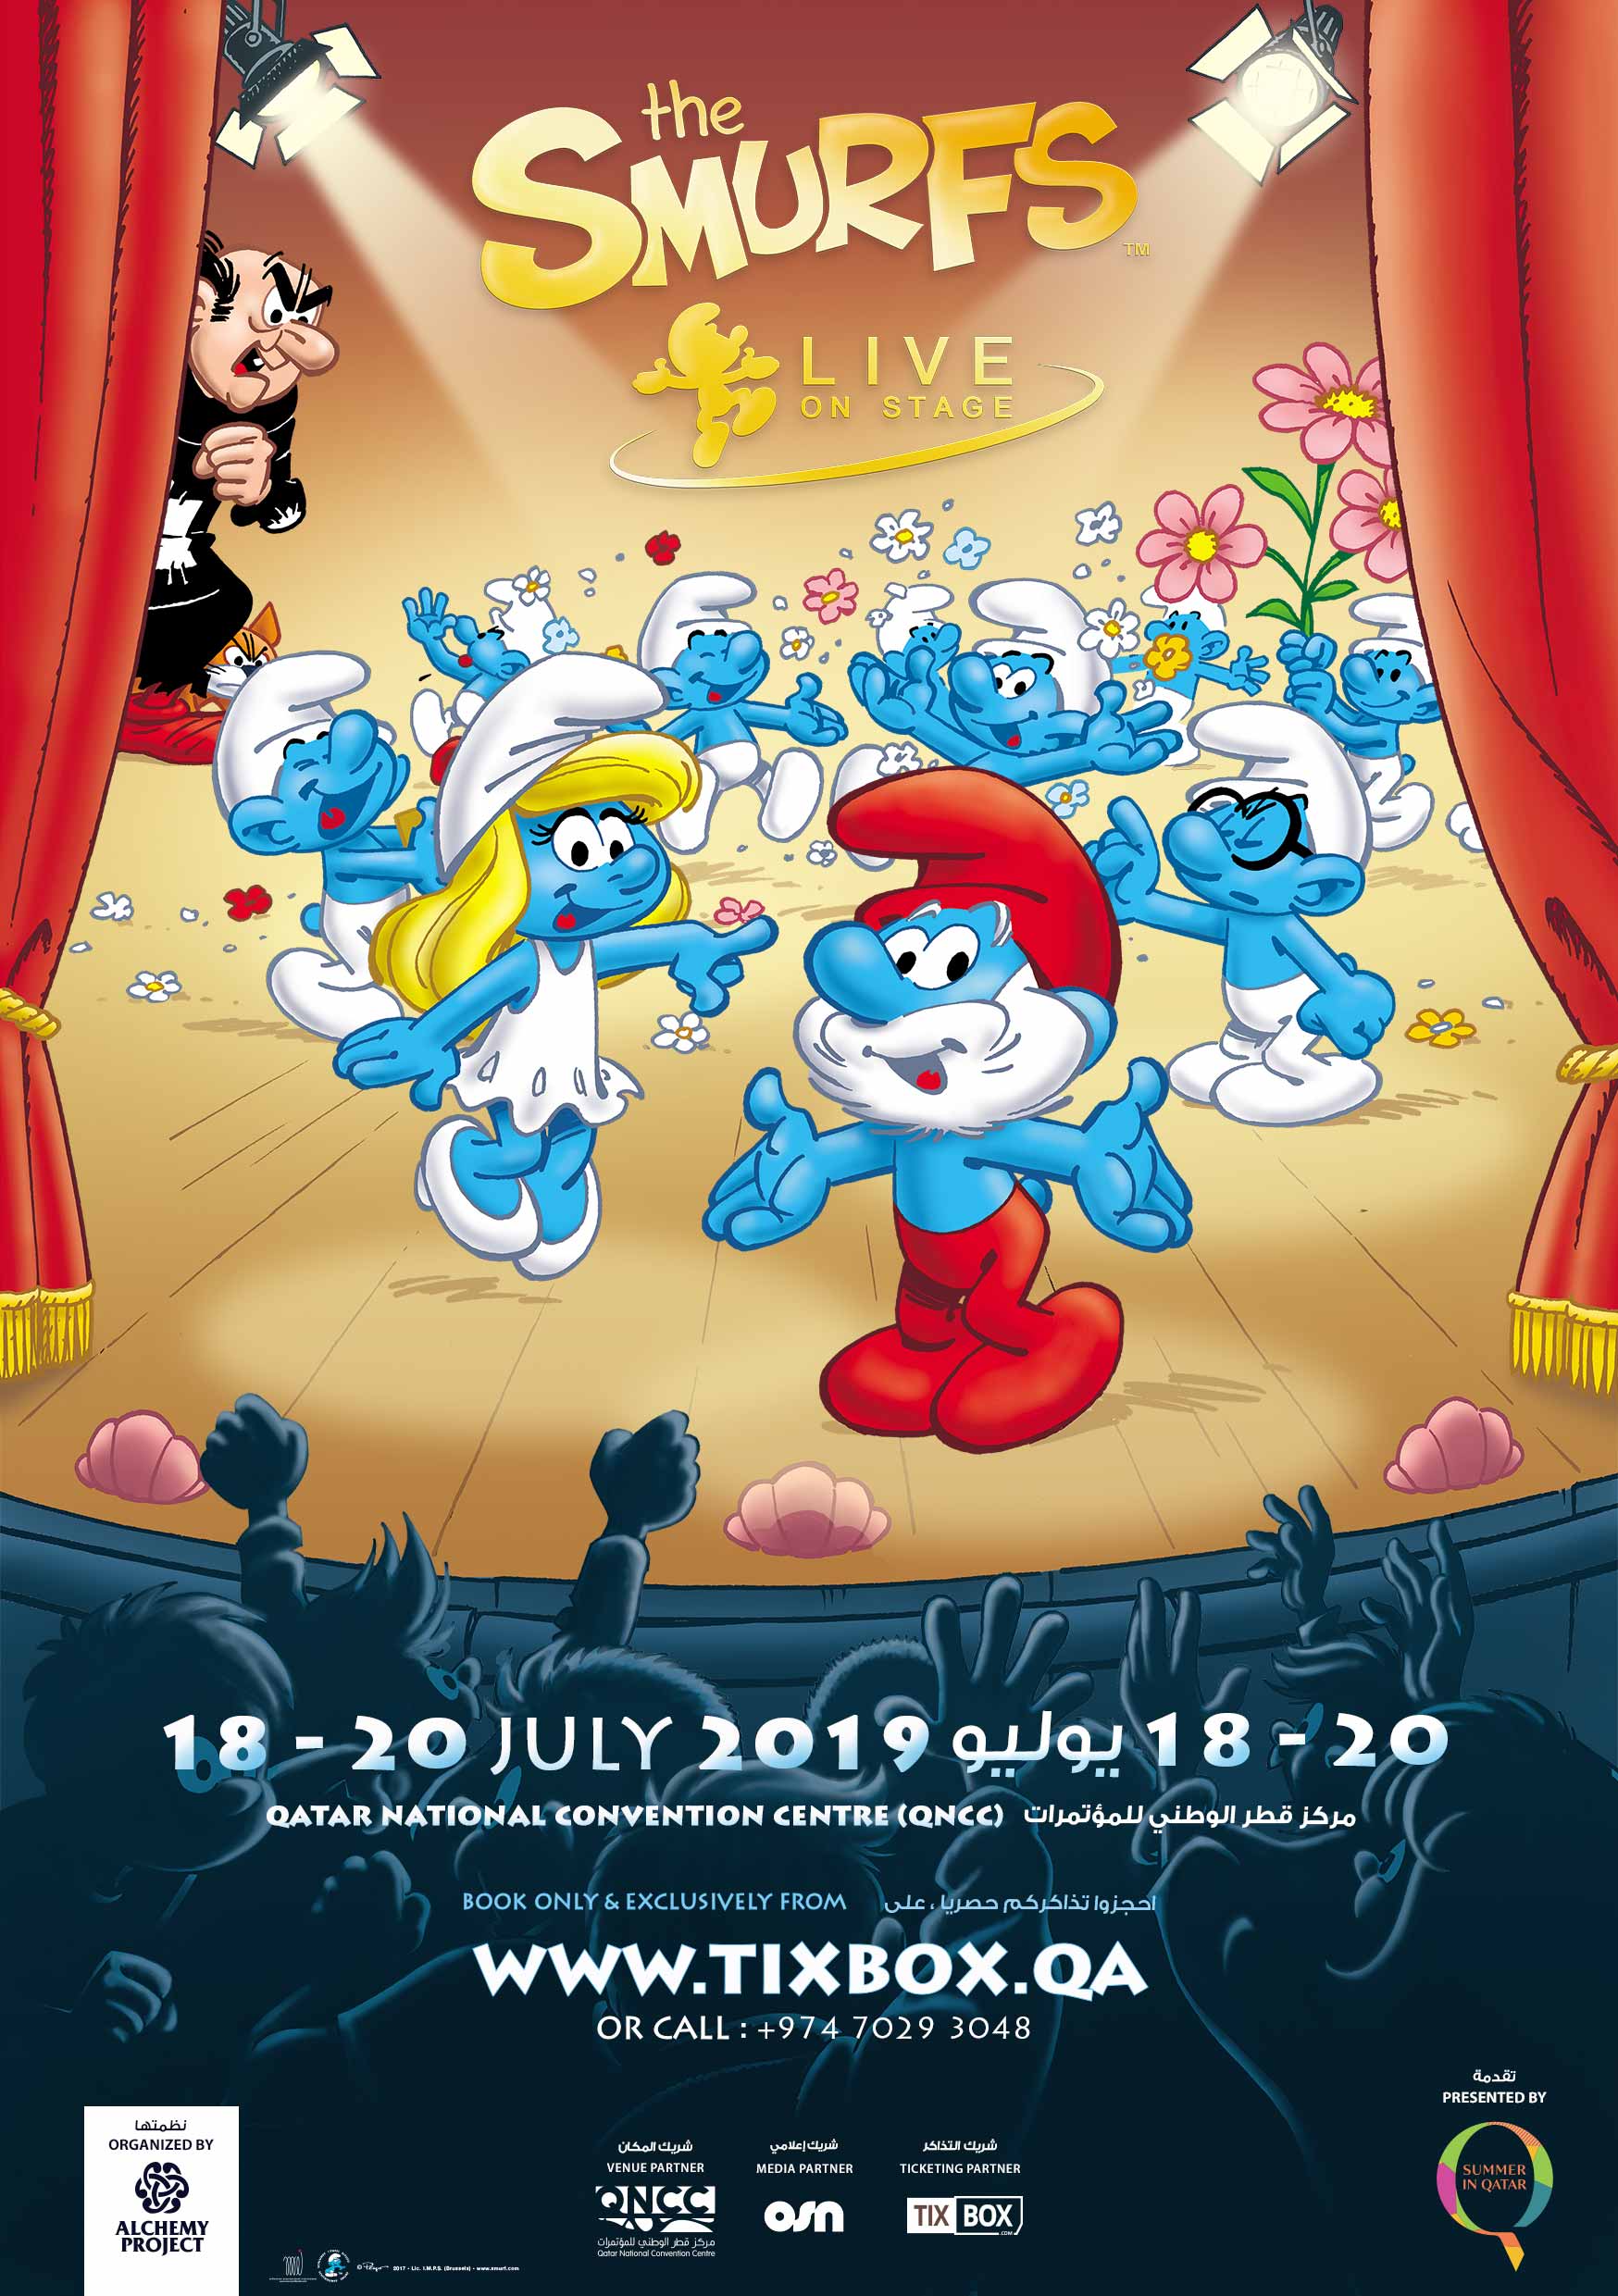 THE SMURFS LIVE ON STAGE